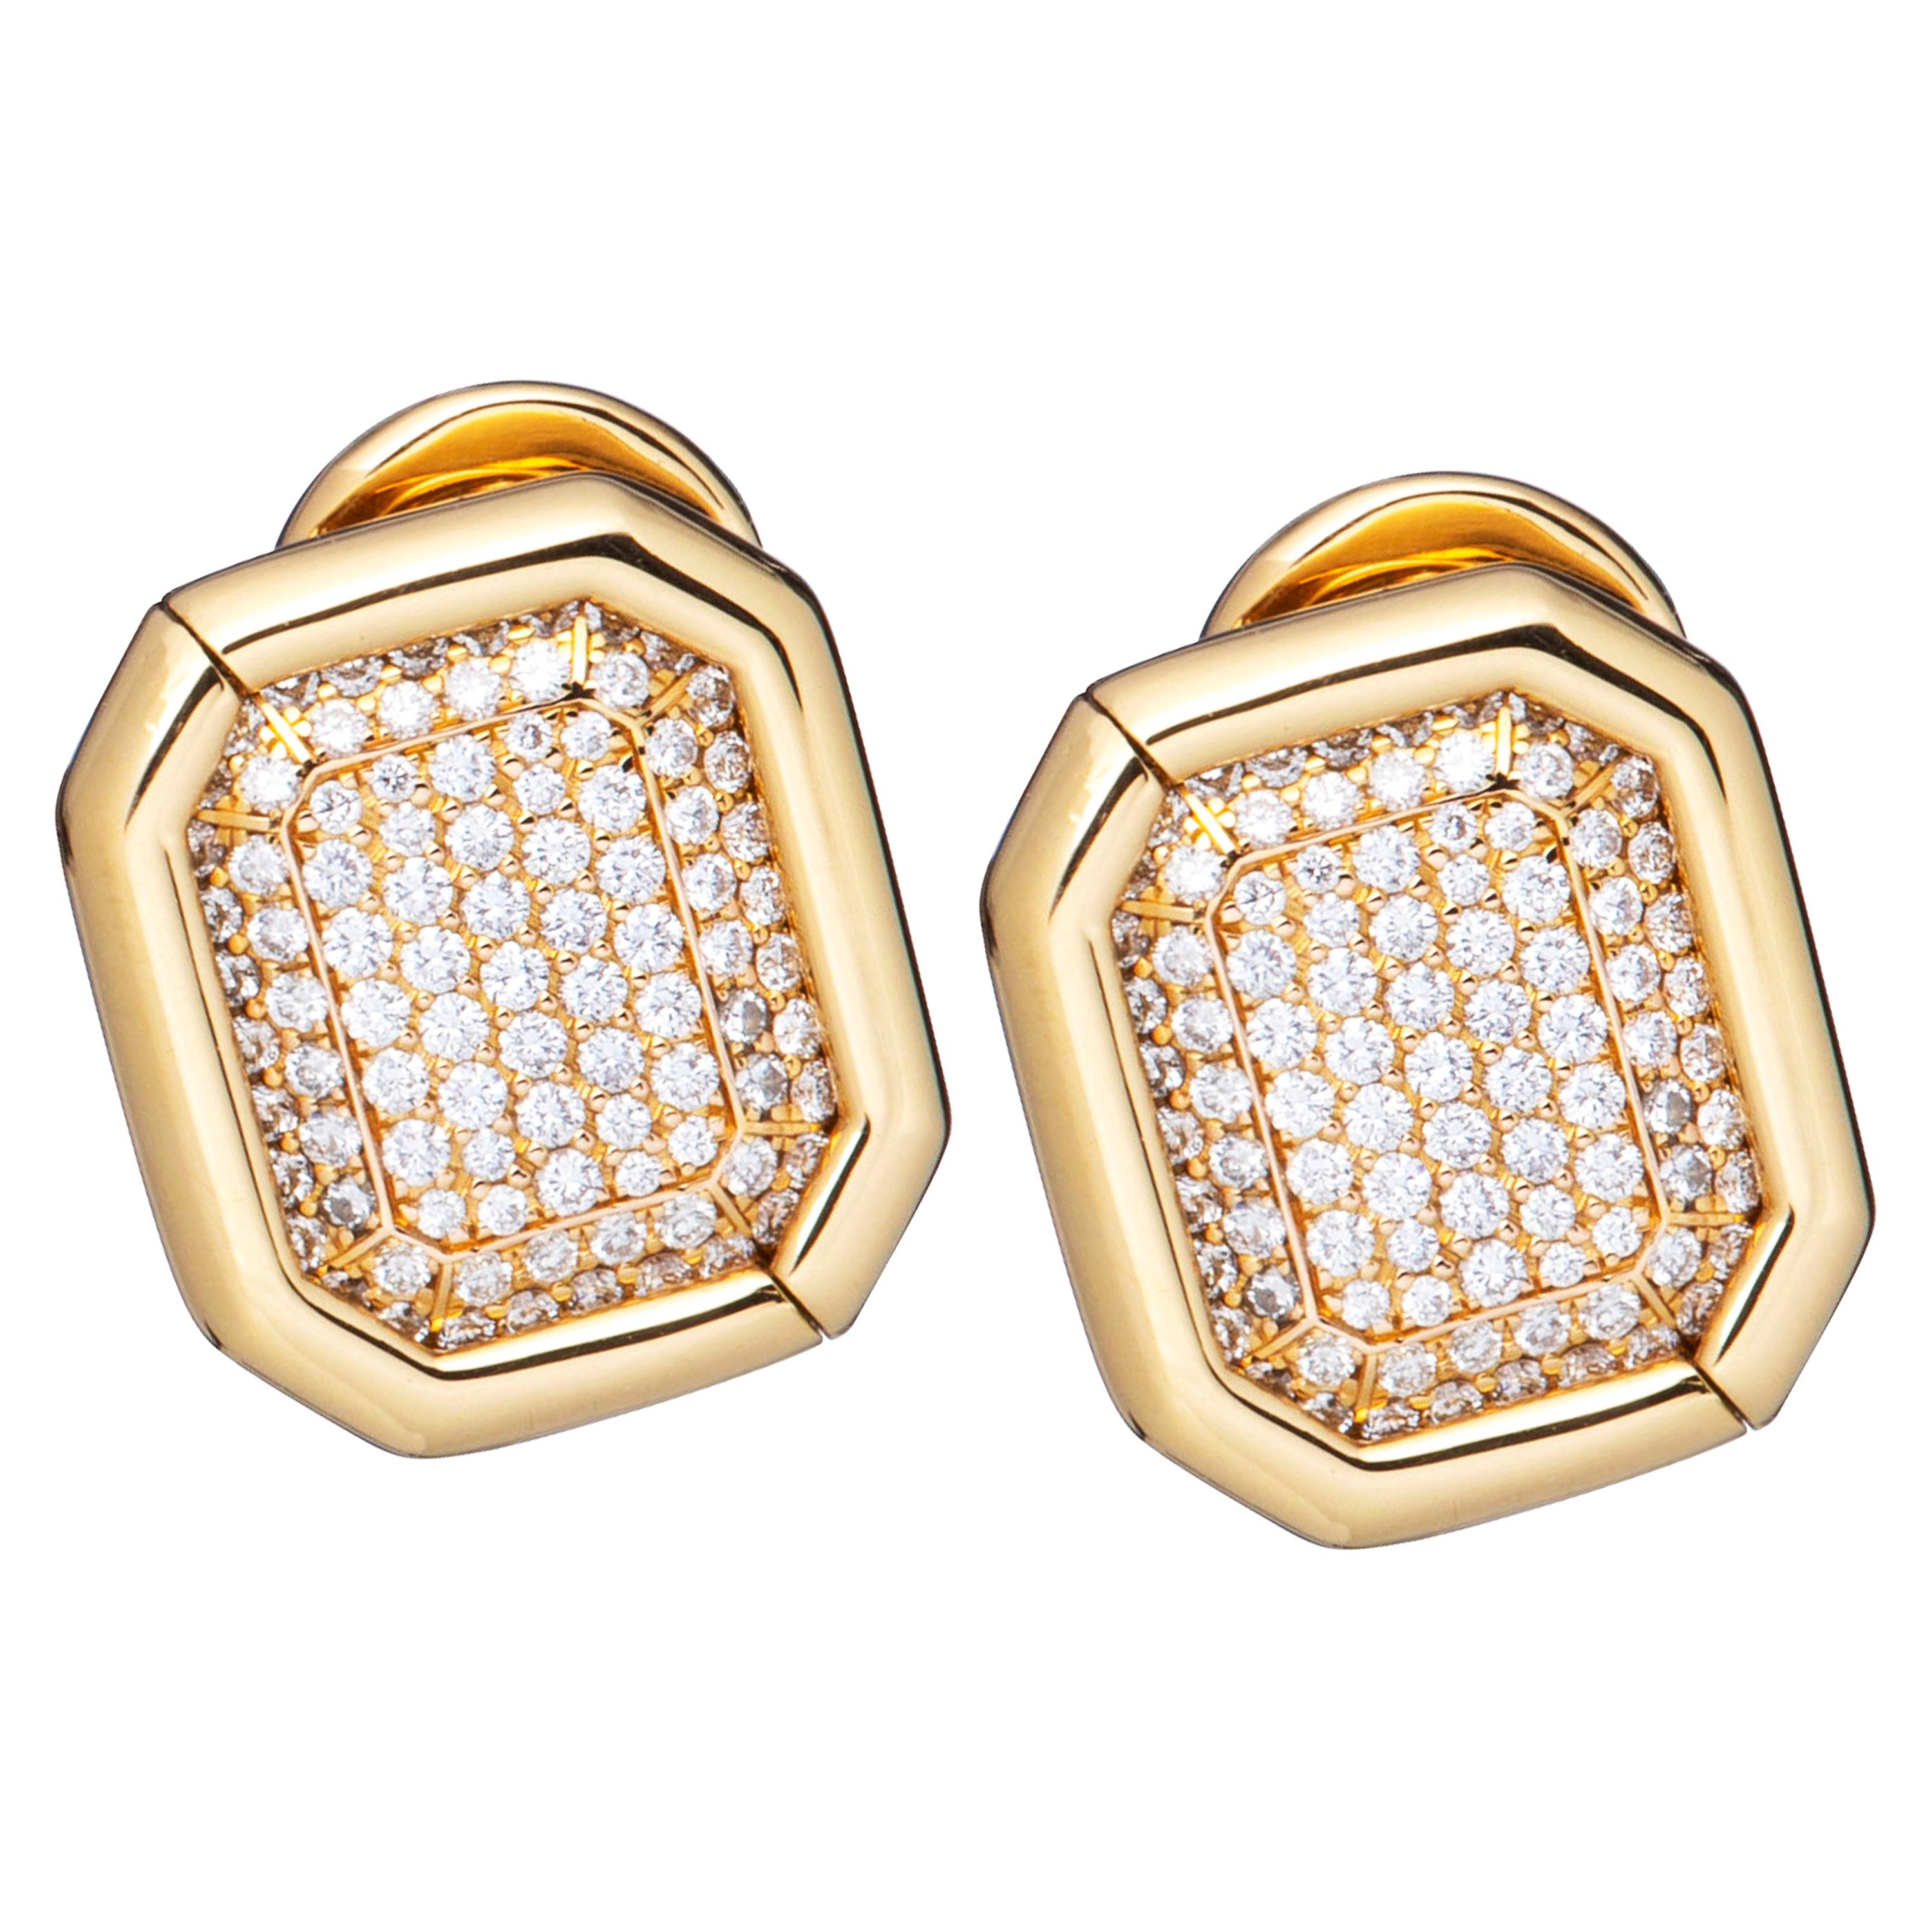 Chopard Yellow Gold Pave Diamond Earrings 84/6014 For Sale